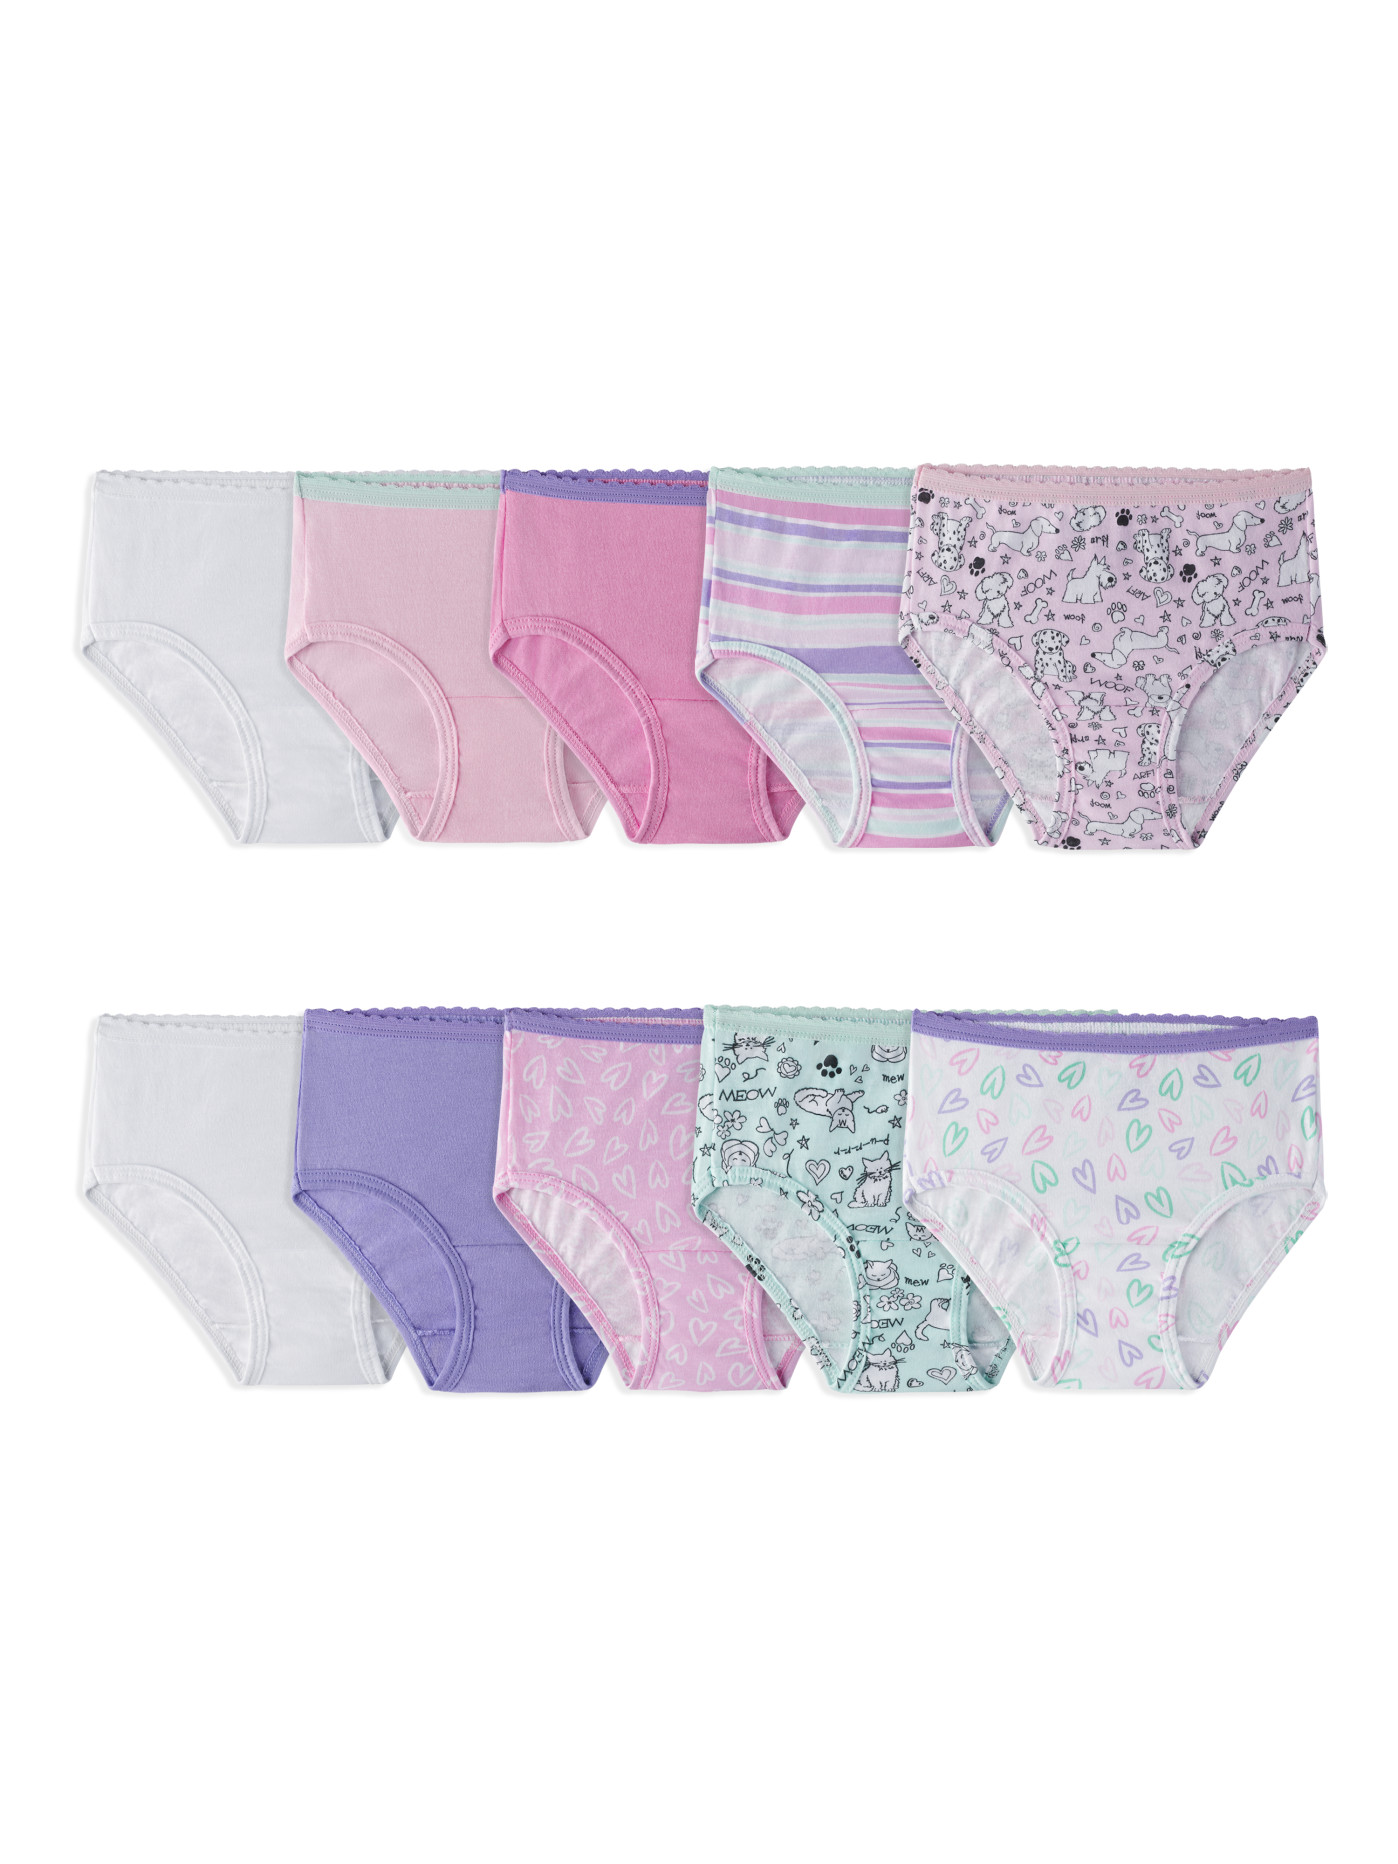 Find more Six Pair Fruit Of The Loom Girls Underwear, Size 8 for